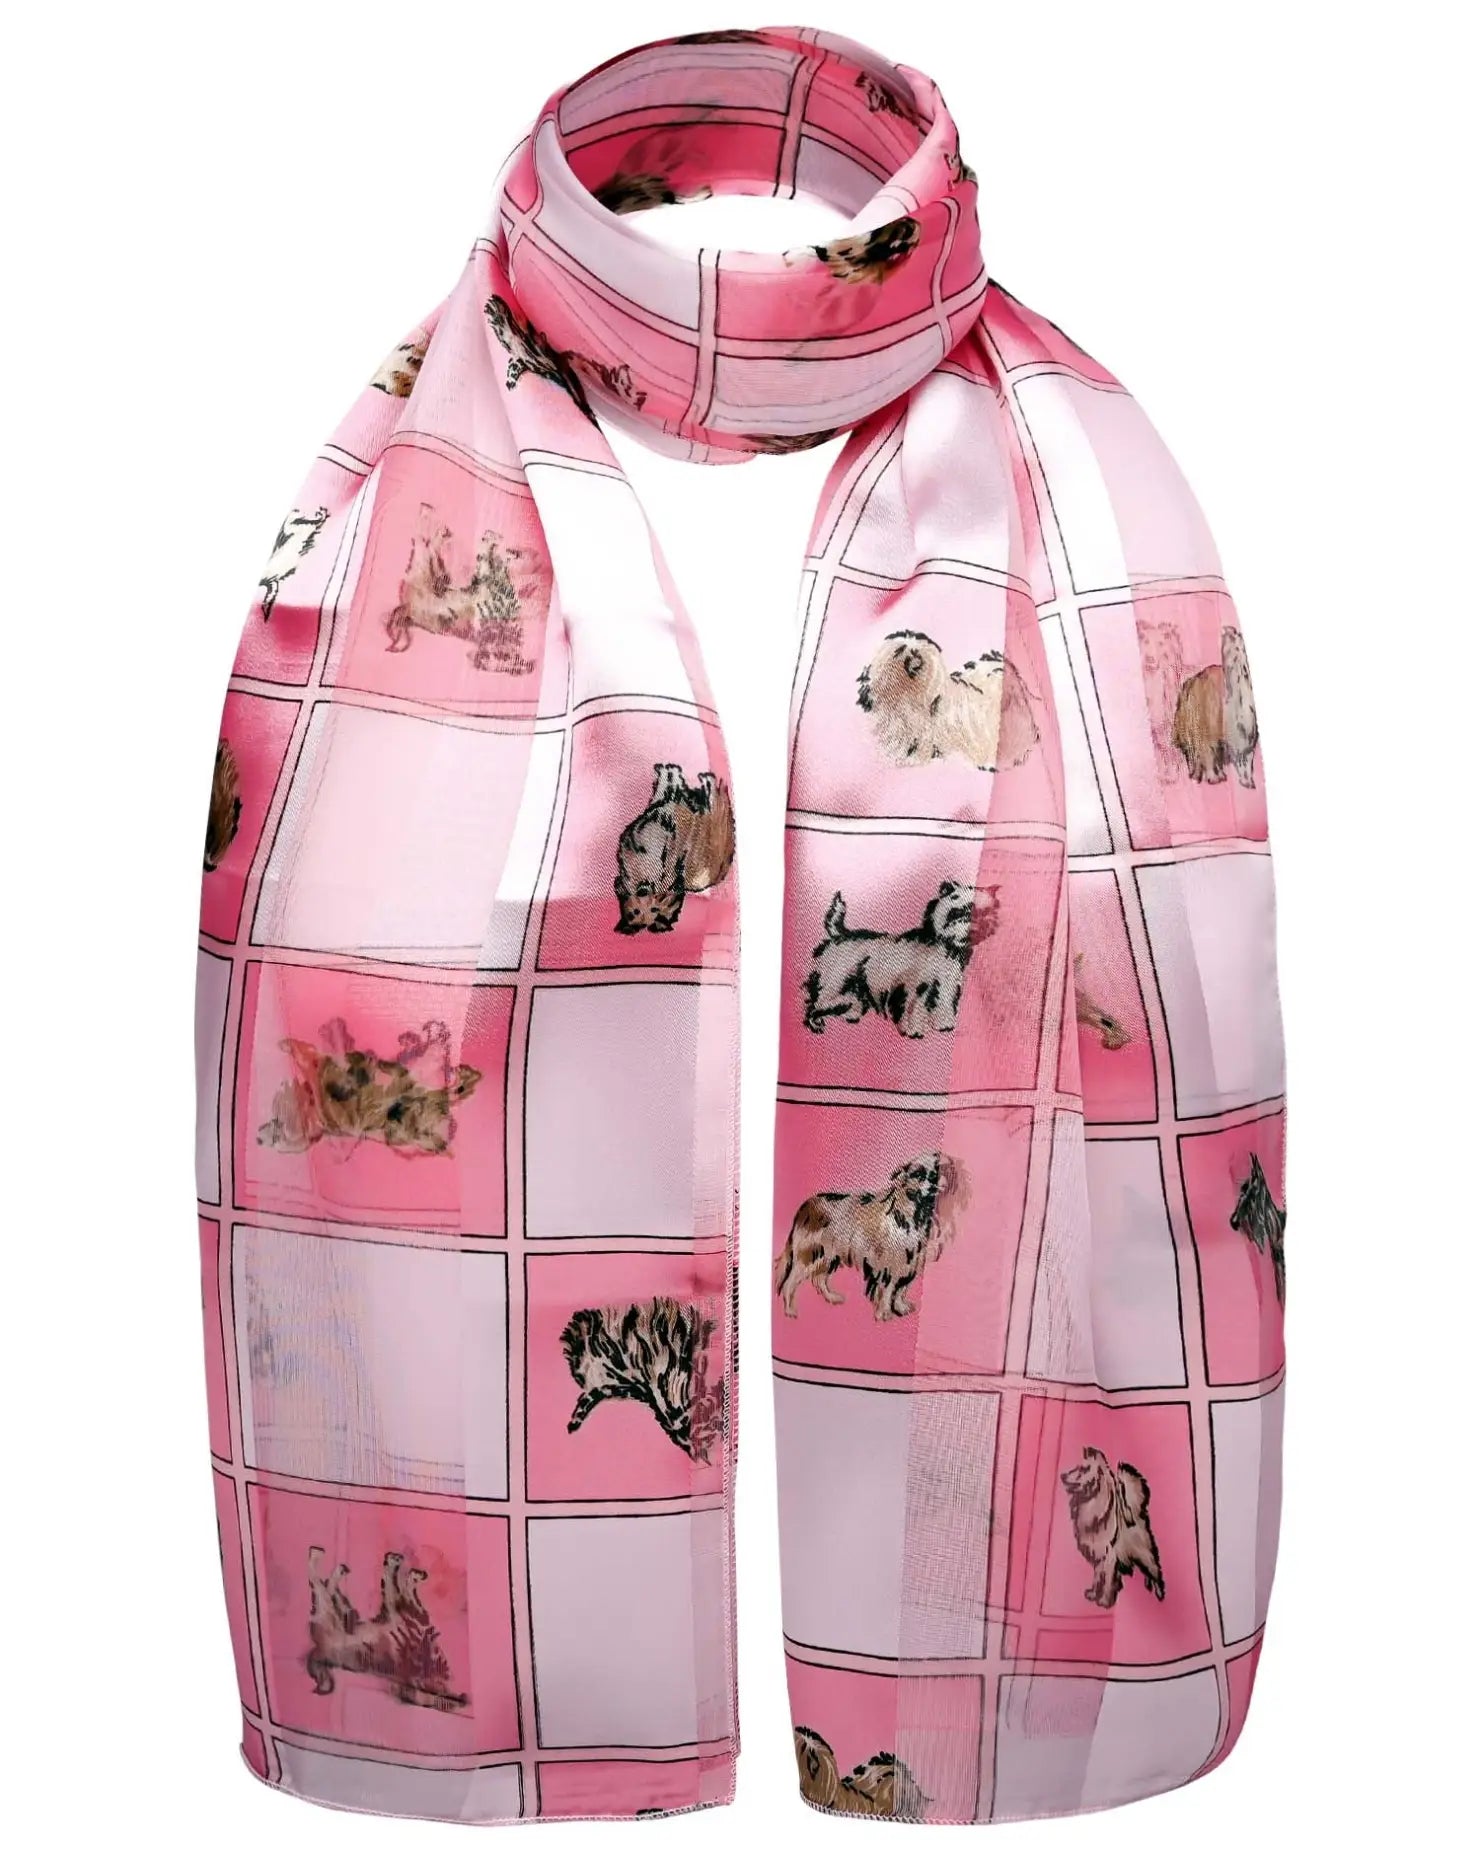 Pink cat print scarf with luxurious satin fabric, perfect for any event.